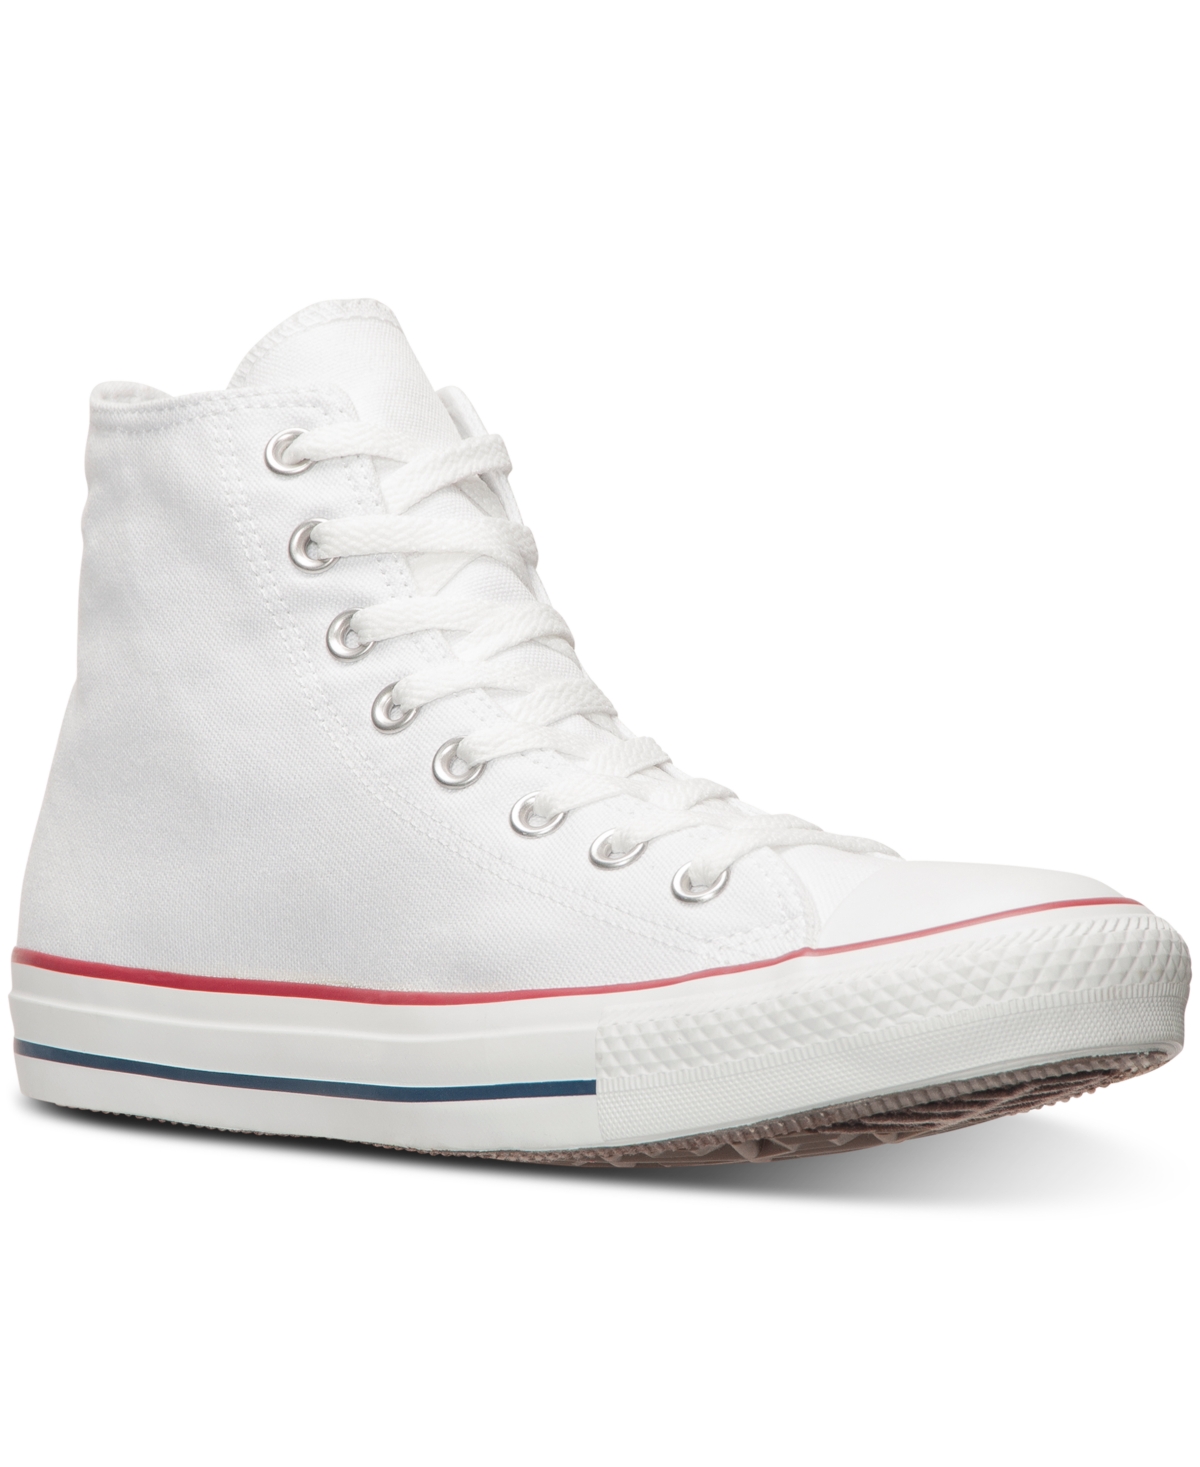 UPC 022859282666 product image for Converse Men's Chuck Taylor Hi Top Casual Sneakers from Finish Line | upcitemdb.com